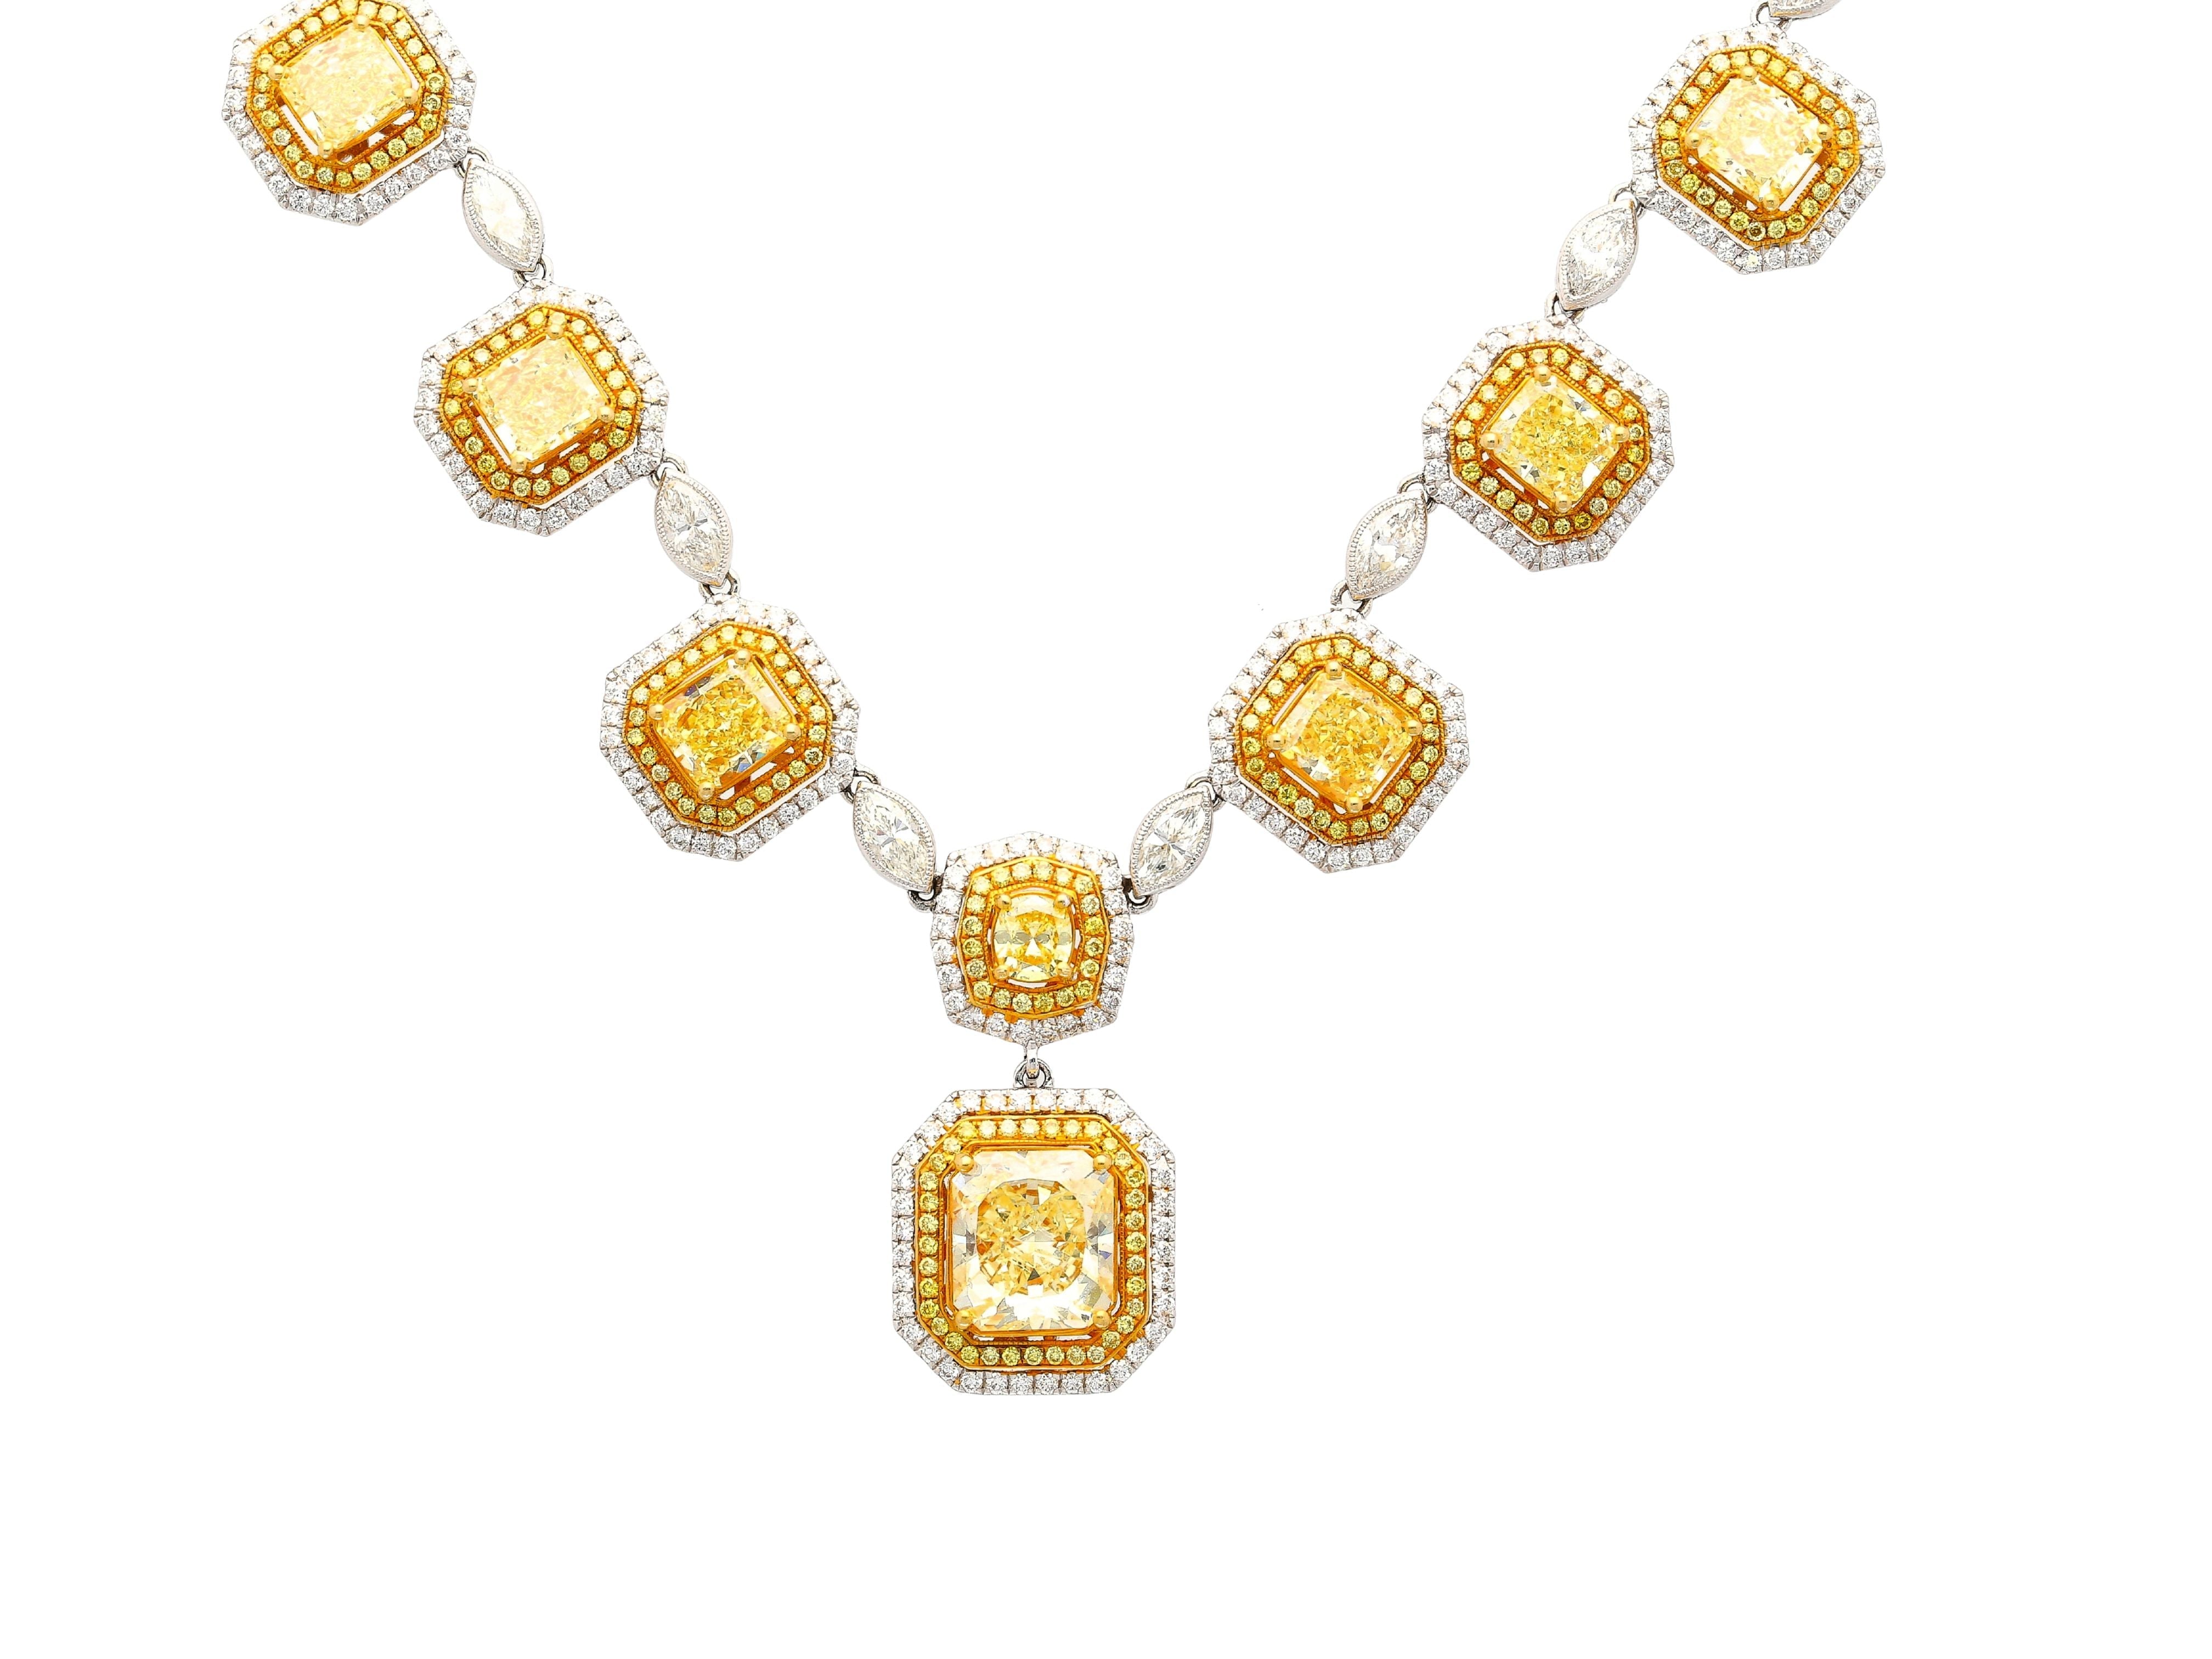 Magnificent-GIA-Certified-25-Carat-Total-Natural-Fancy-Yellow-Diamond-Necklace-in-18K-Gold-Necklace.jpg